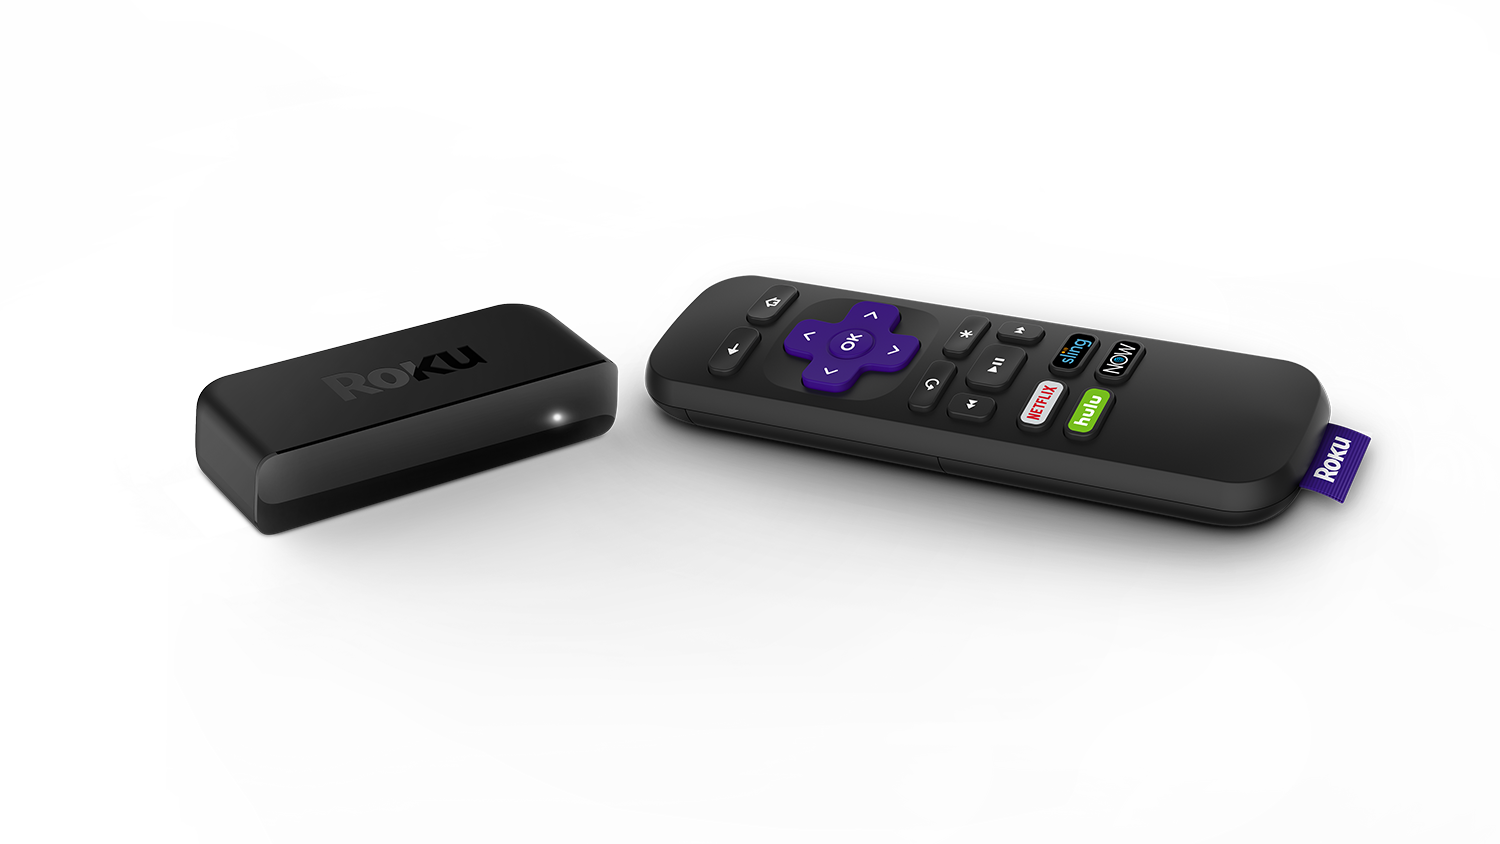 EXPIRED: Roku is Having a Clearance Sale With 4K Rokus Starting At Just $29